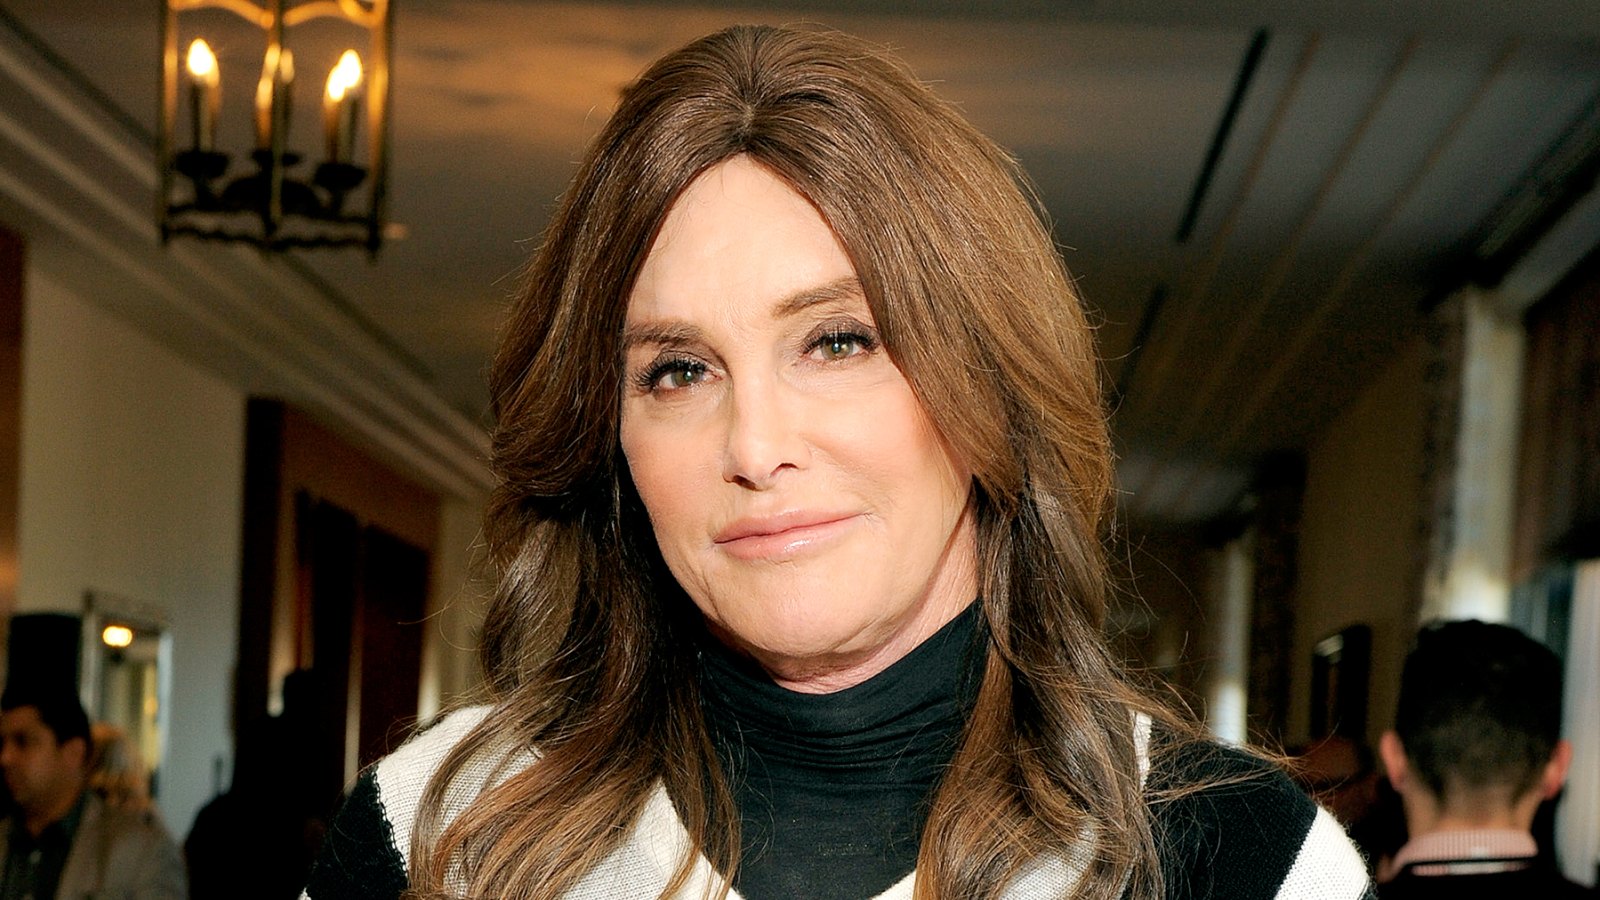 Caitlyn Jenner attends the 2016 MAKERS Conference Day 2 at the Terrenea Resort on February 2, 2016 in Rancho Palos Verdes, California.